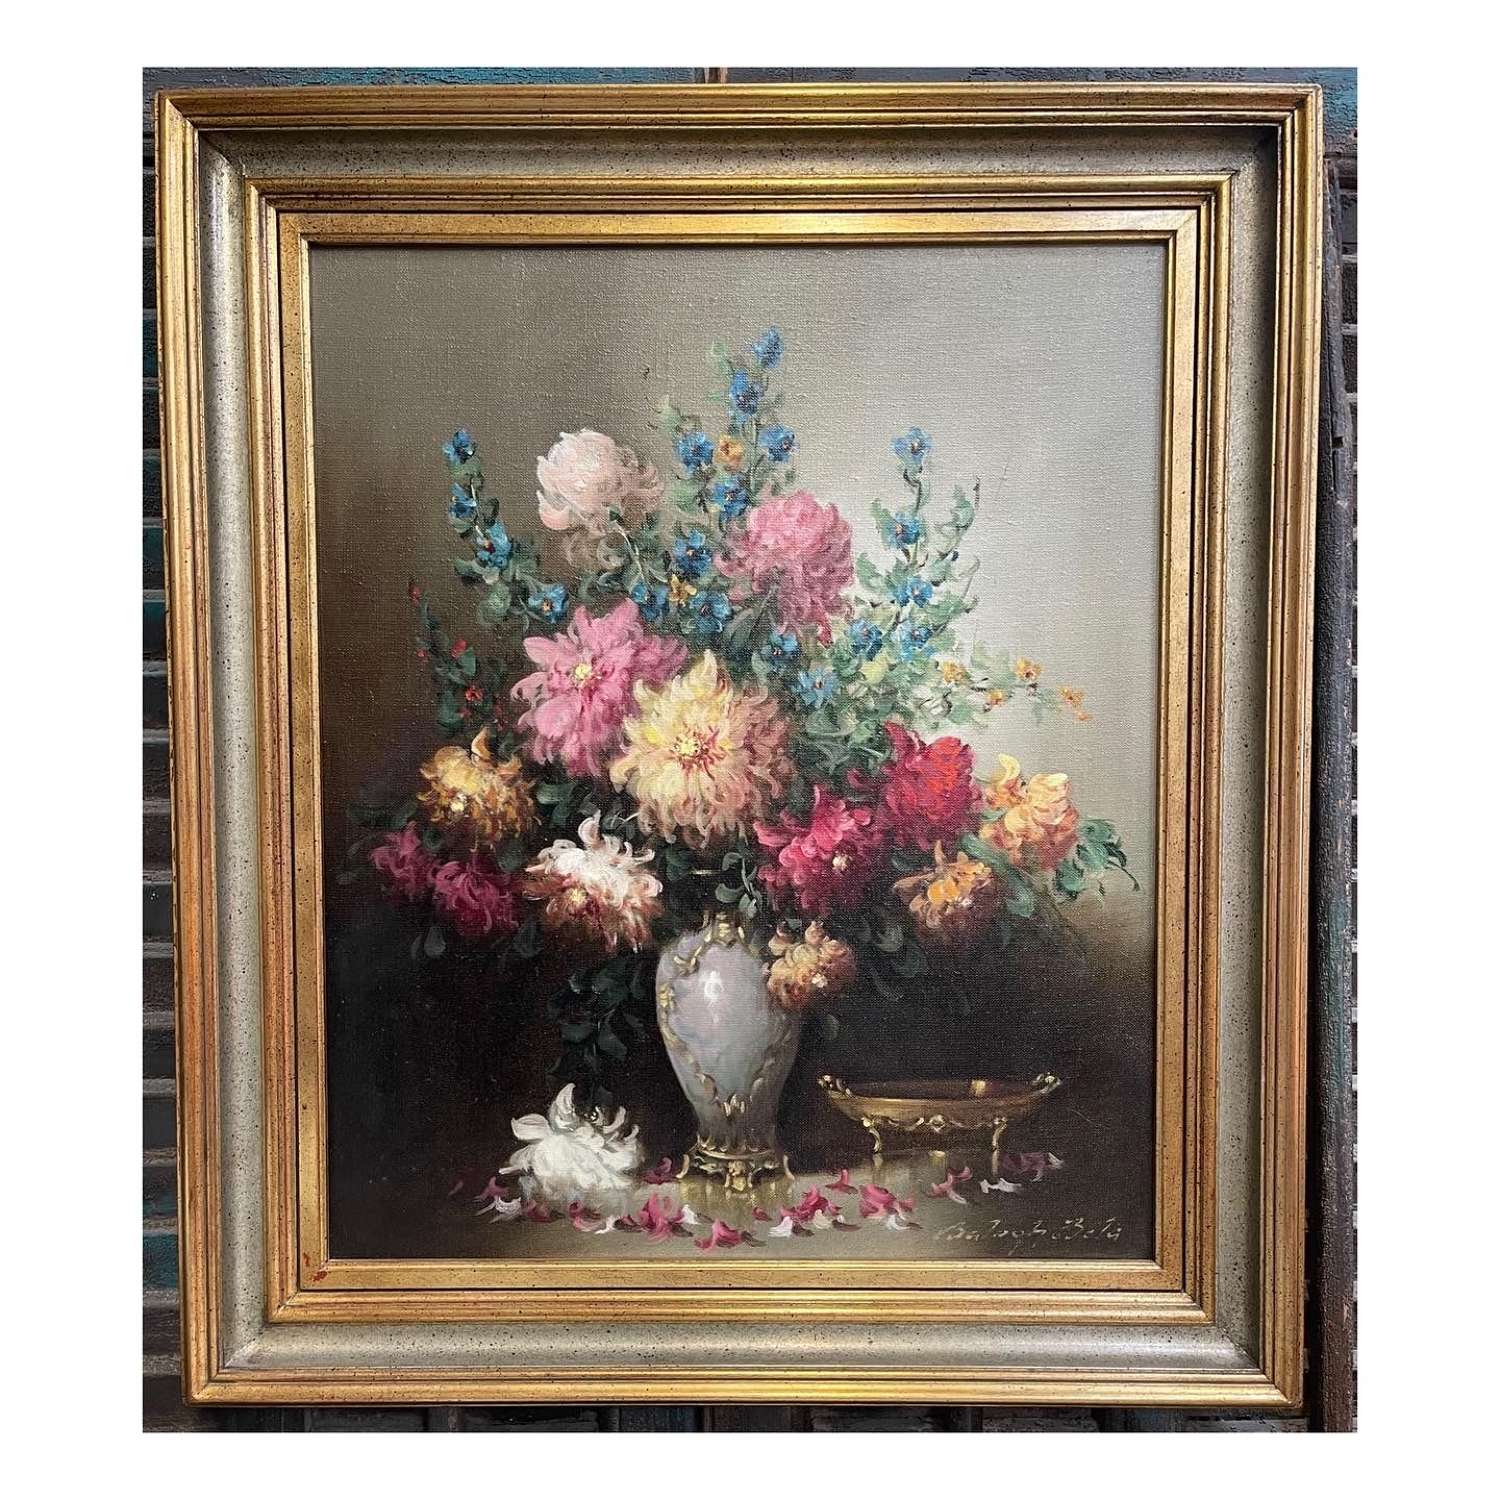 Stunning French Floral Painting Oil on Canvas